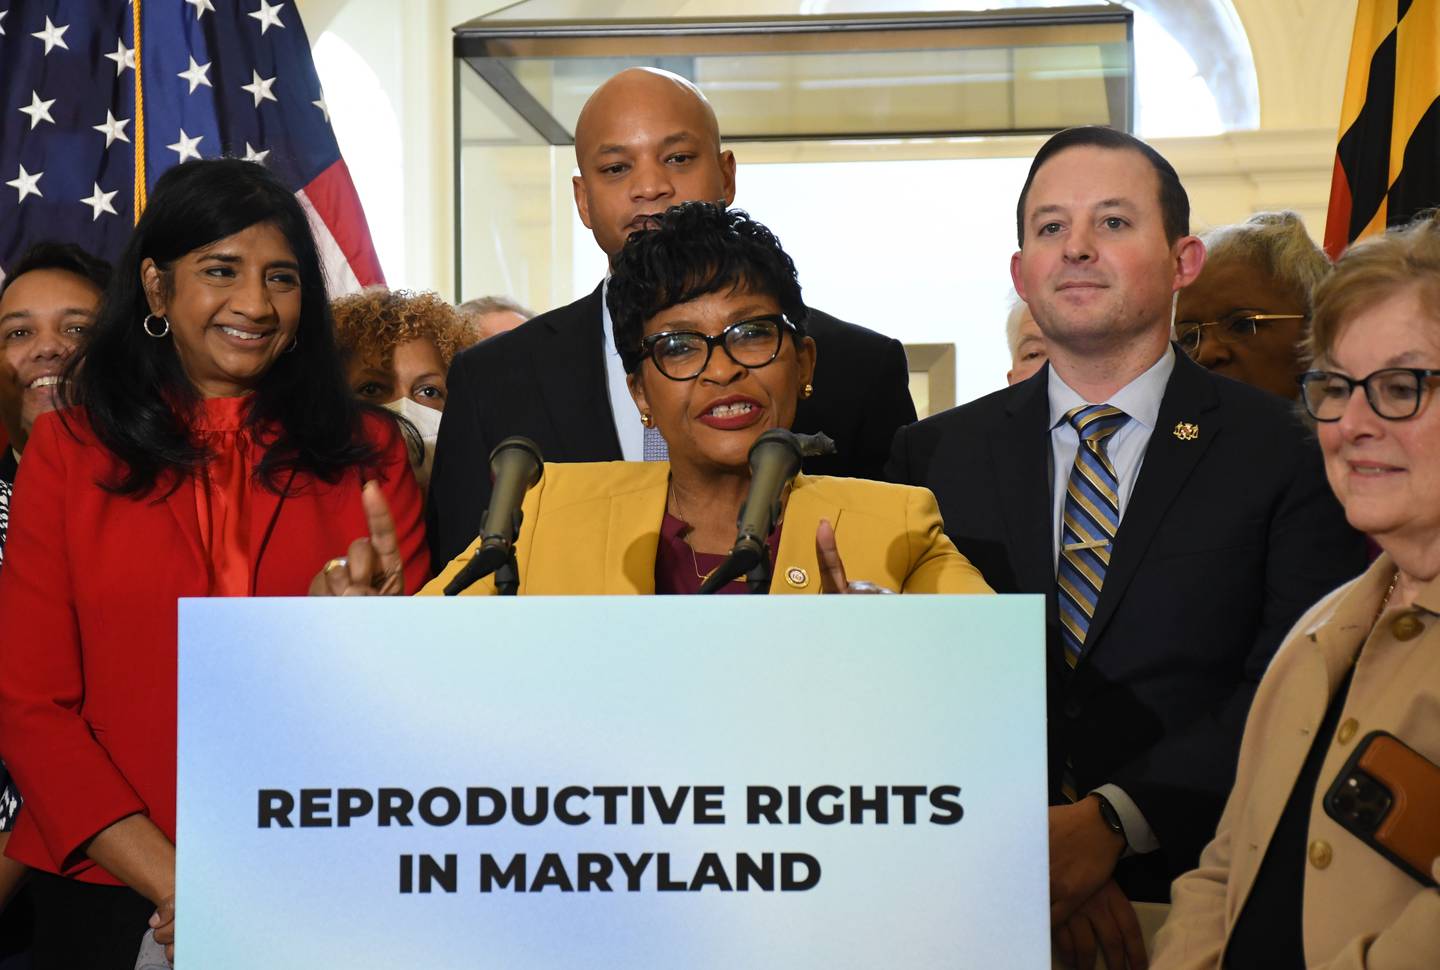 Maryland House of Delegates Speaker Adrienne A. Jones discusses her proposal to put the right to reproductive choice -- including abortion -- into the state constitution, during a press conference at the State House in Annapolis on Thursday, Feb. 9, 2023. She's joined by other political leaders including Lt. Gov. Aruna Miller, Gov. Wes Moore and Senate President Bill Ferguson.